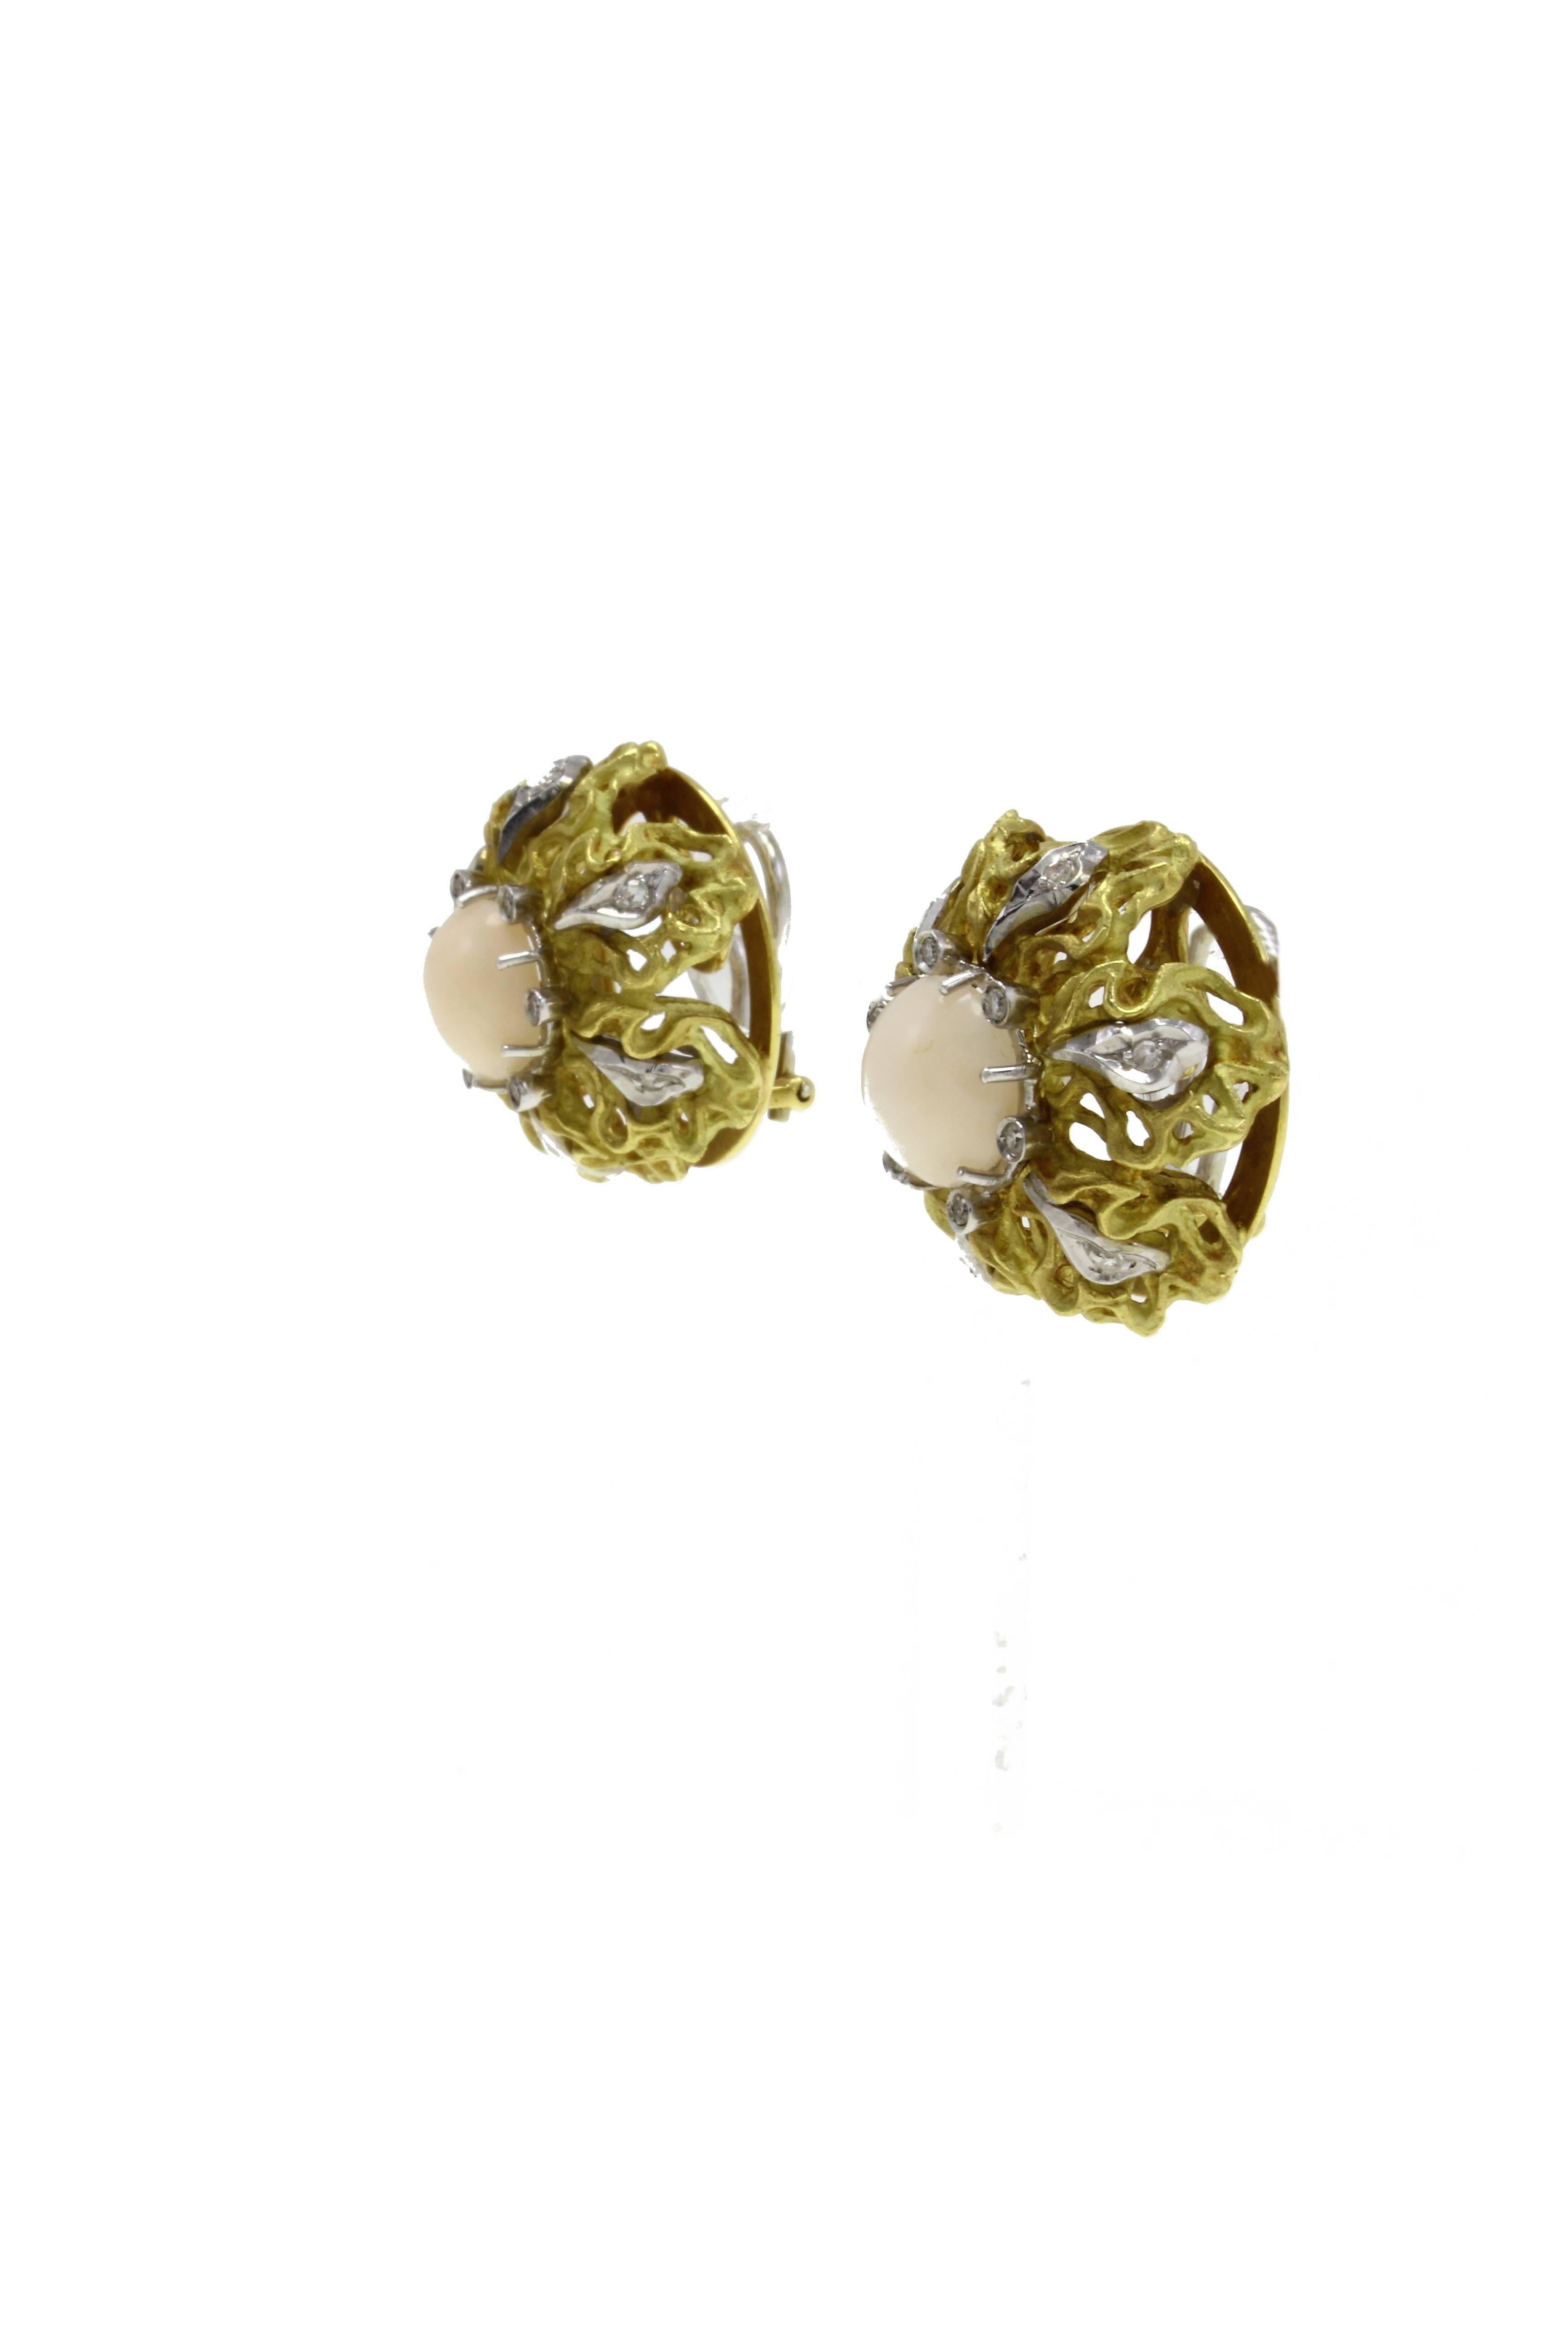 Retro White Diamonds, Pink Coral Buttons, 18 Kt Yellow and White Gold Clip-on Earrings For Sale